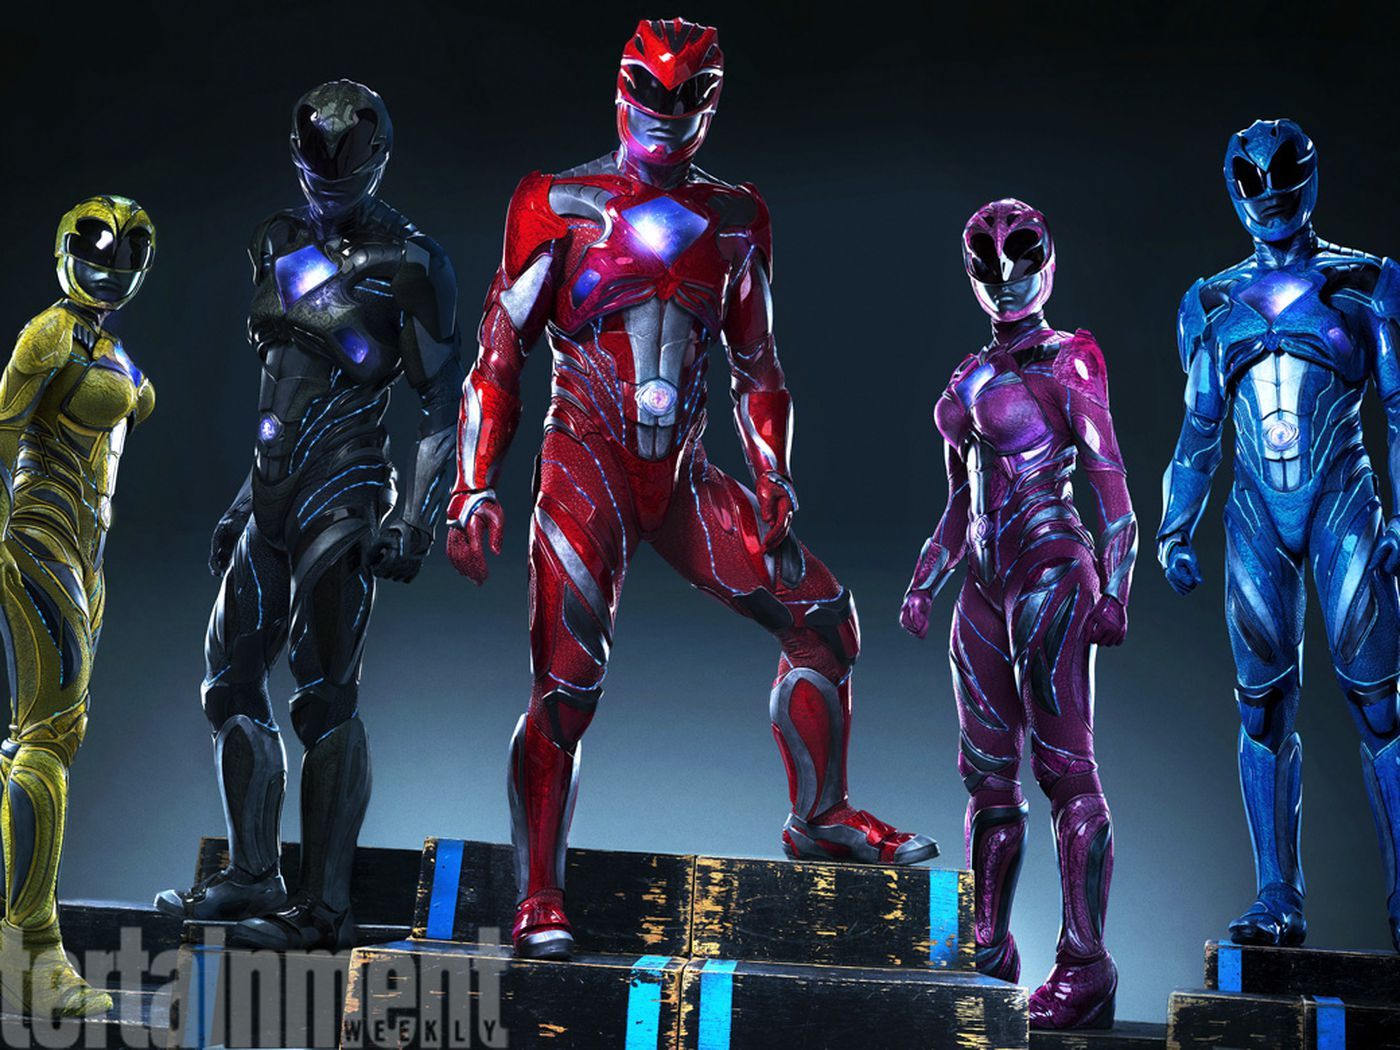 New Power Rangers character posters tease Zords